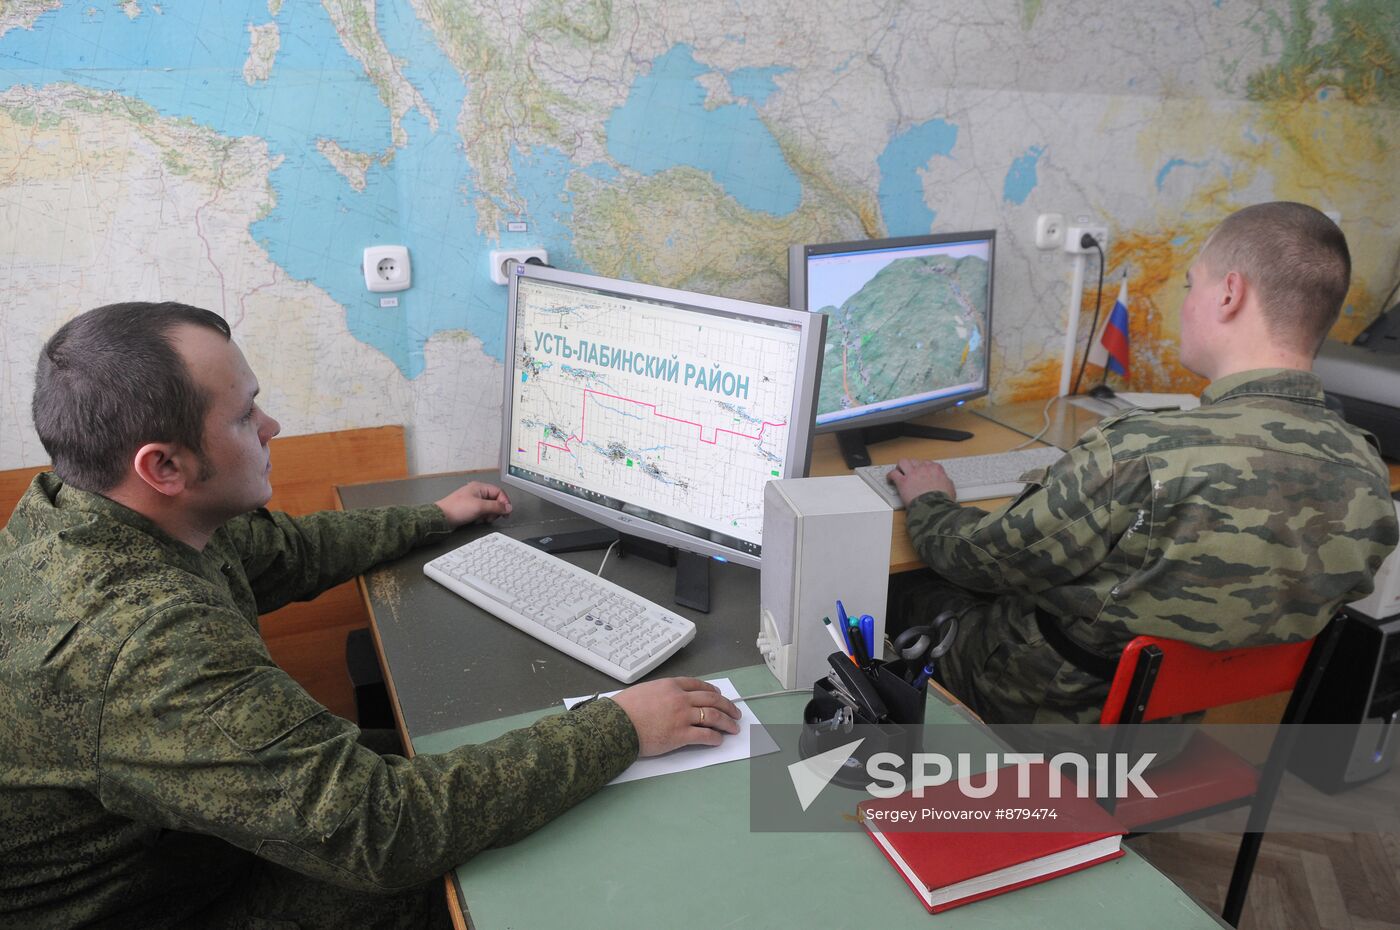 Survey service of South military district